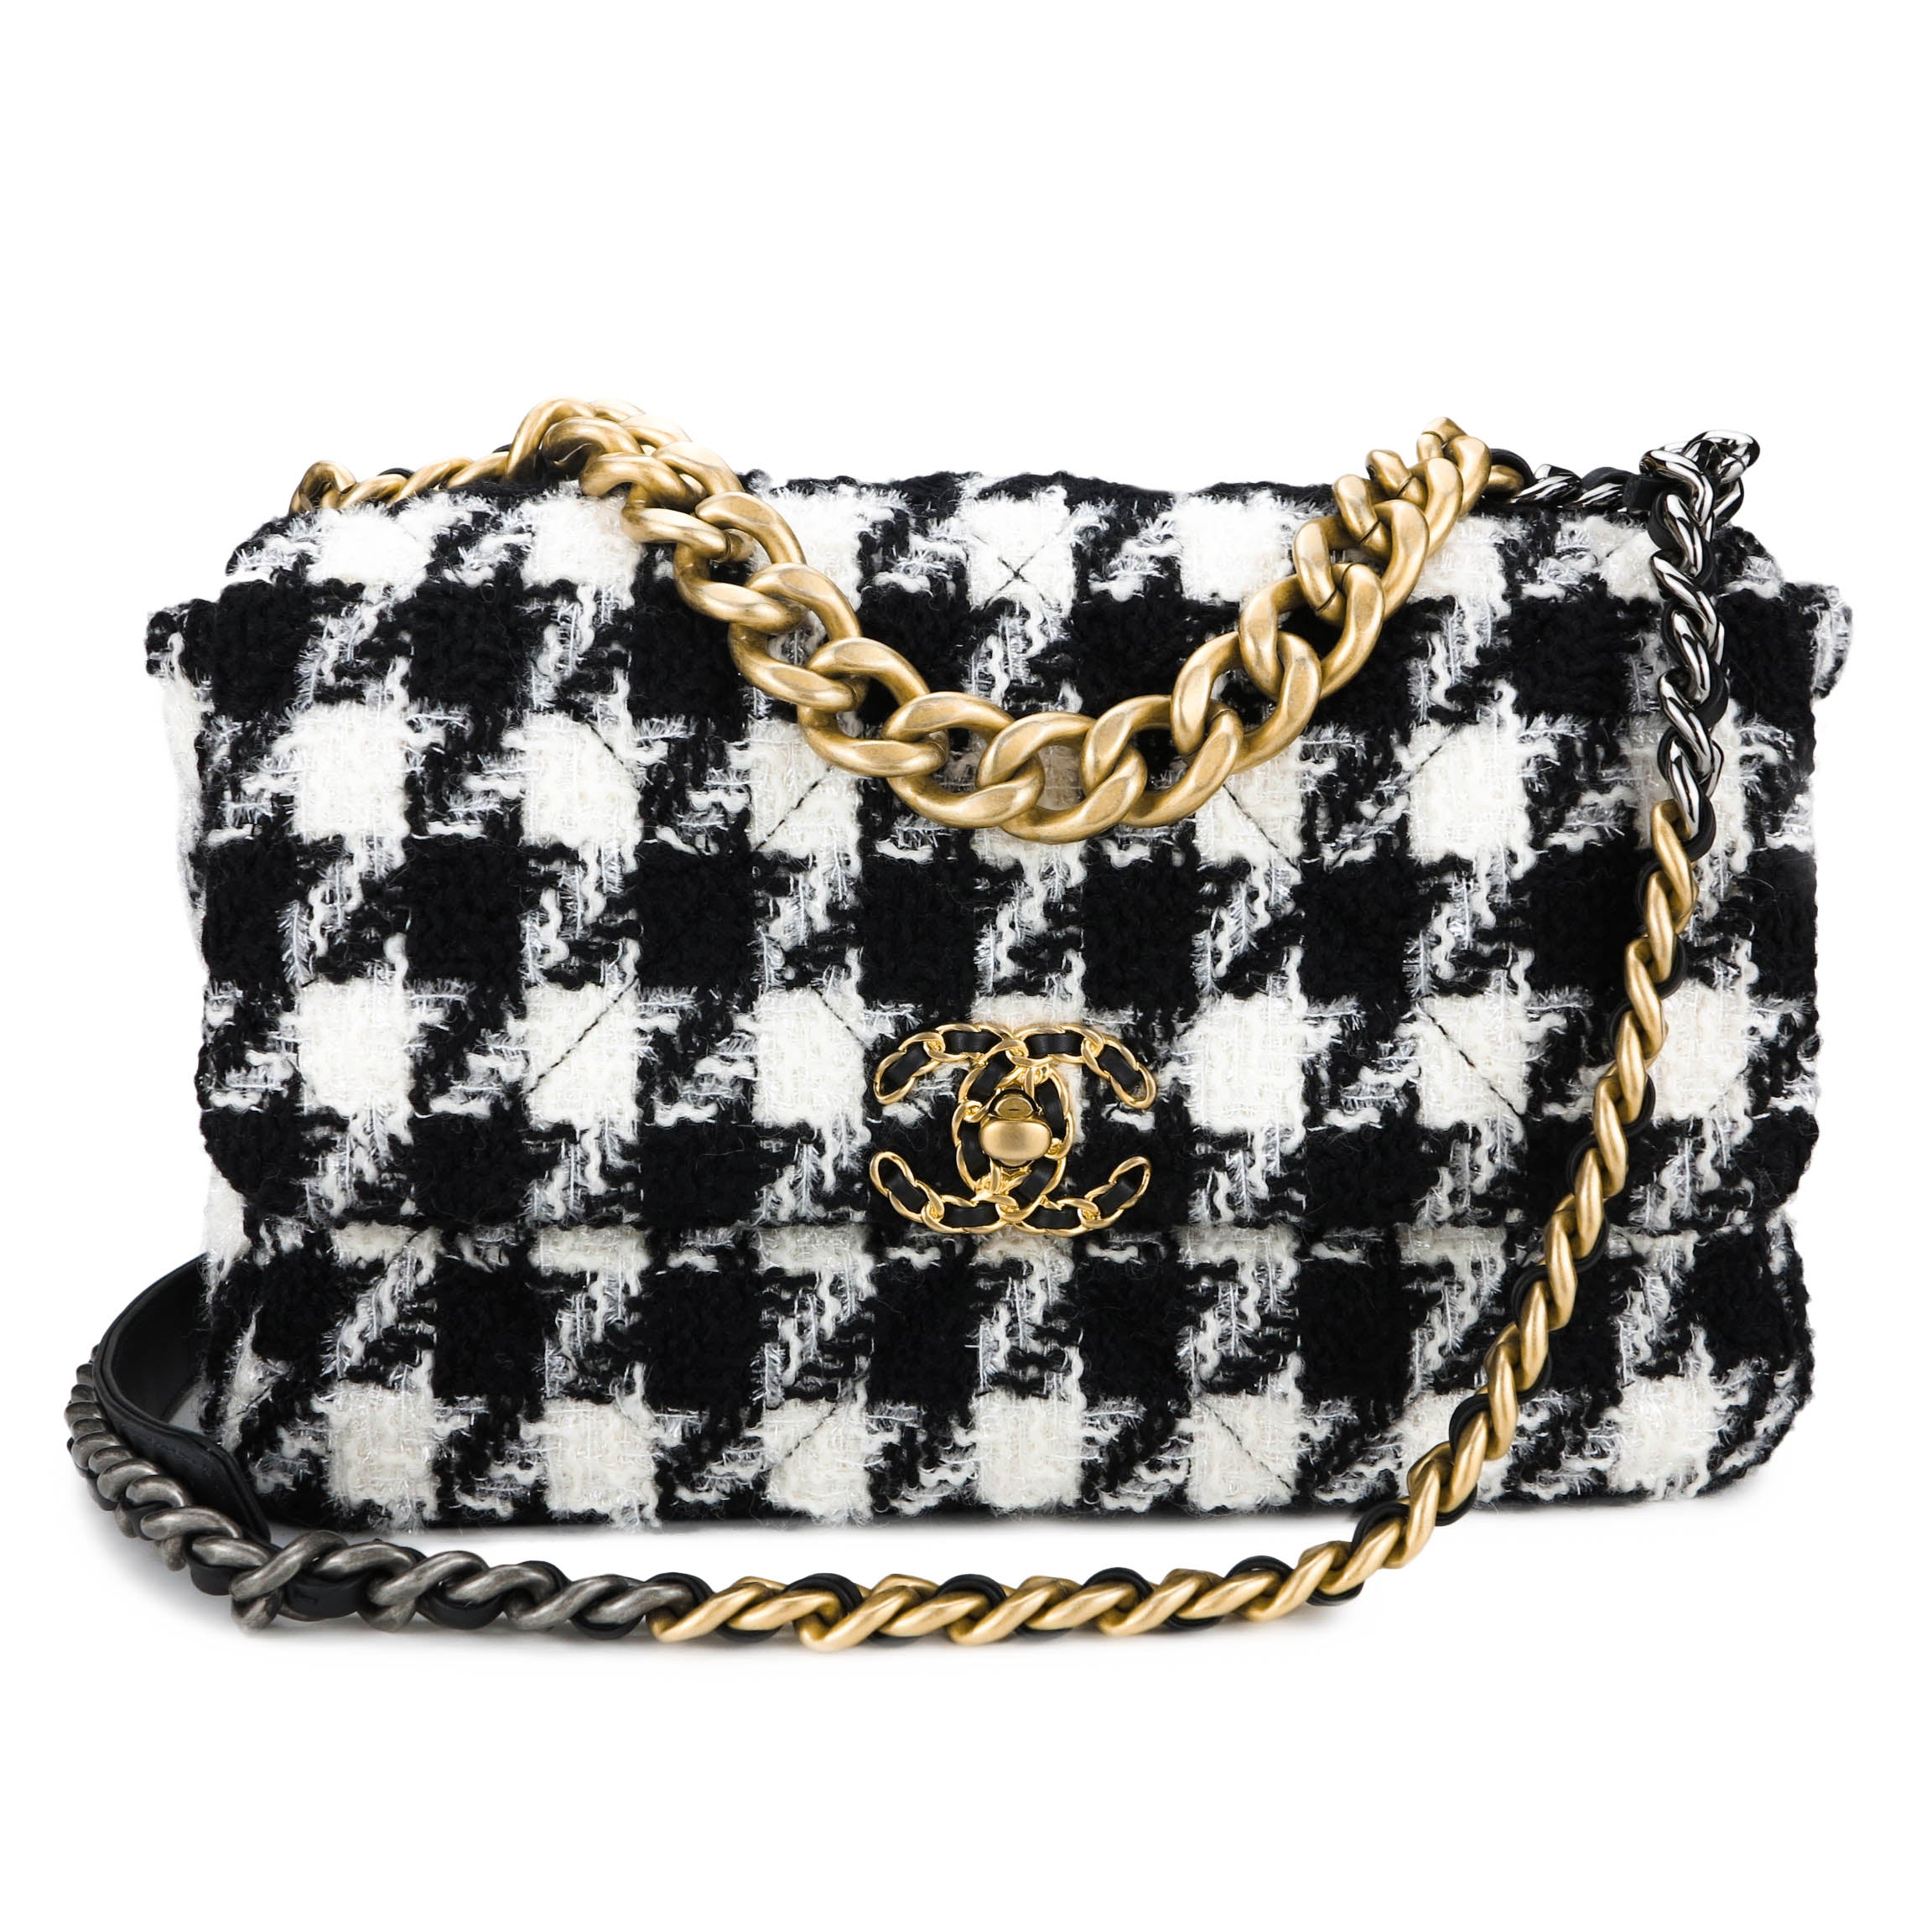 Chanel Black/White Quilted Tweed Chanel 19 Maxi Flap Bag